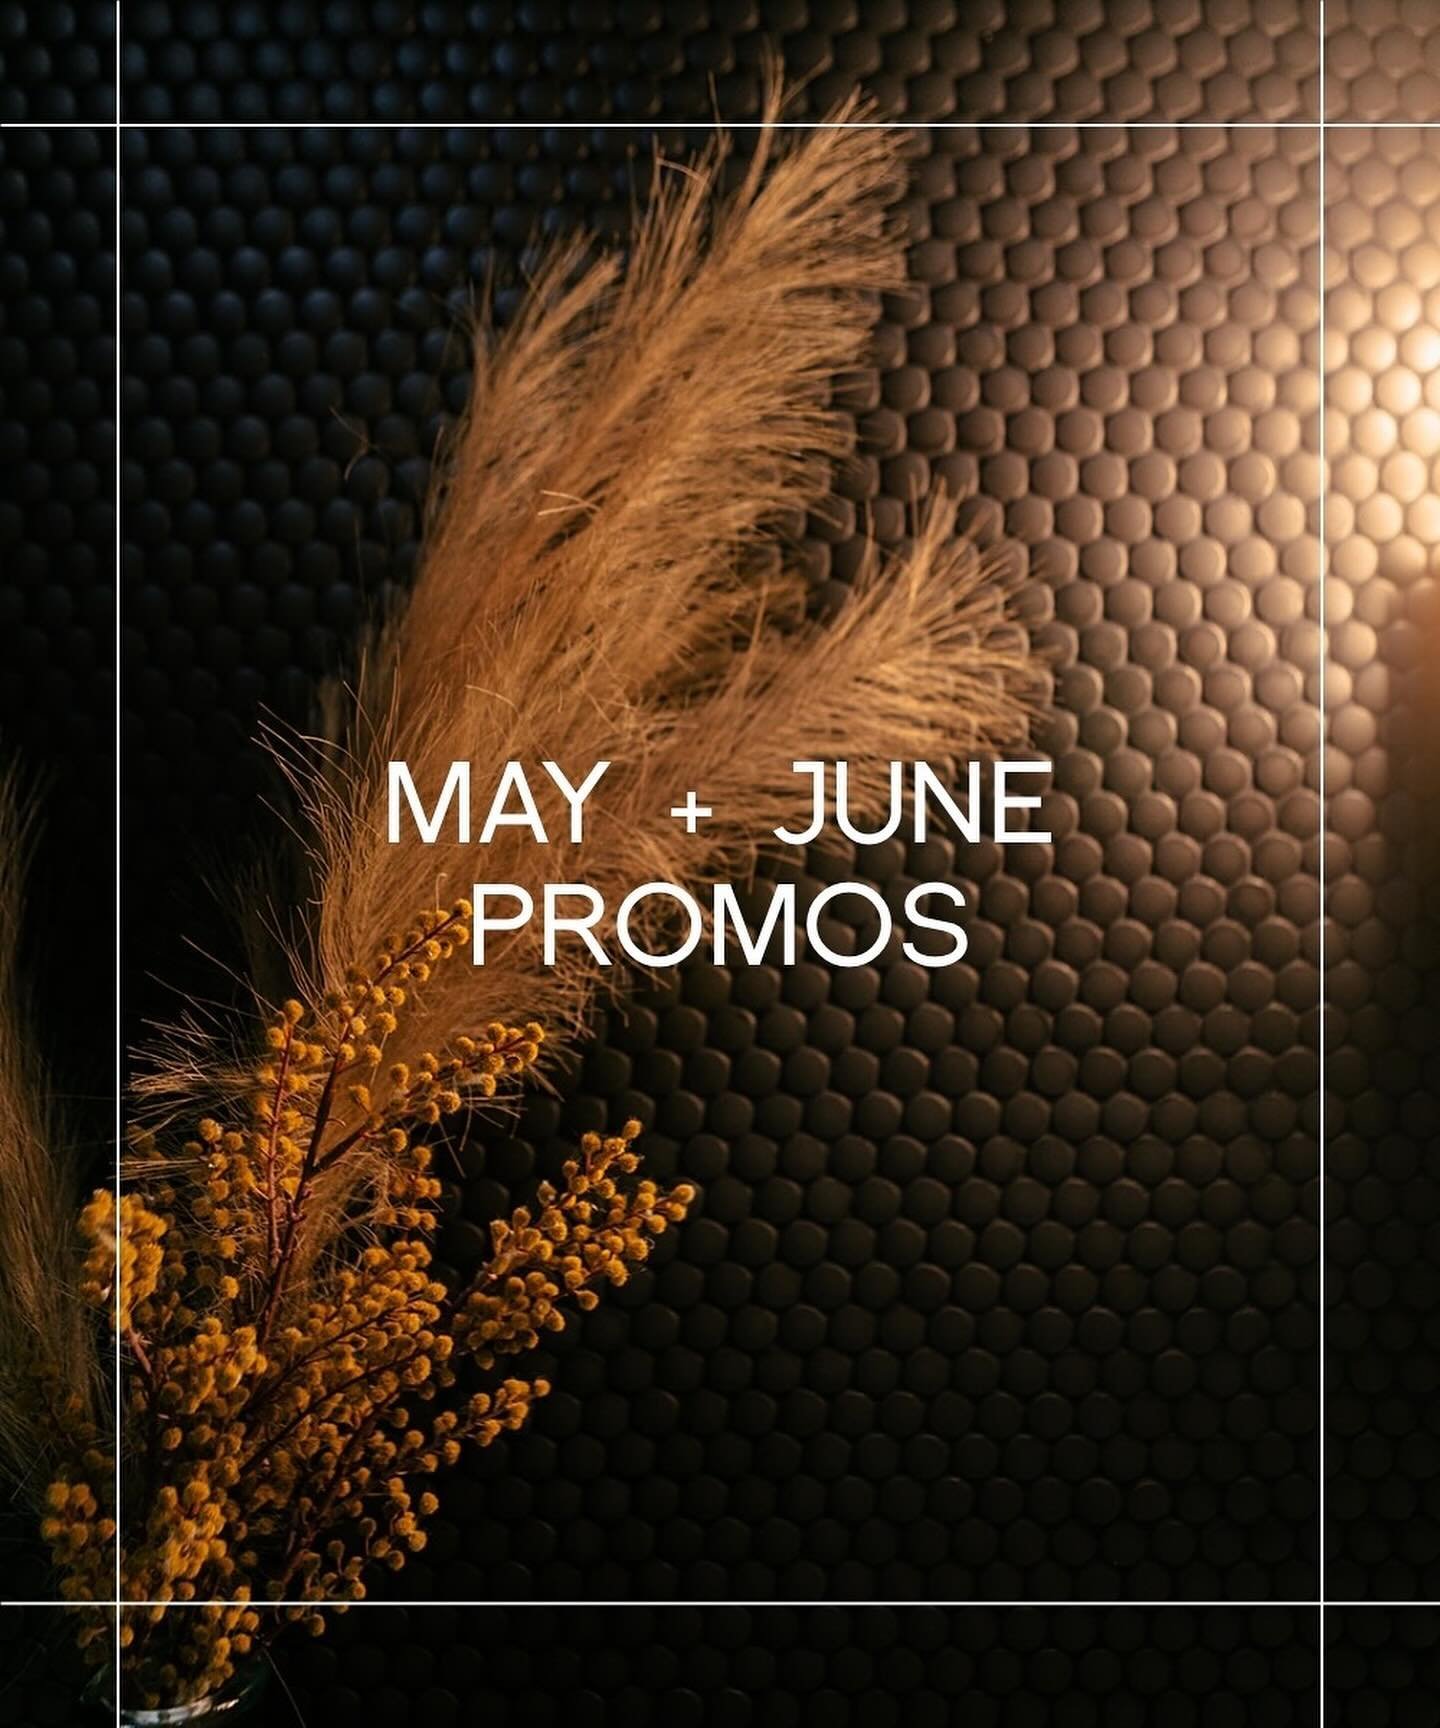 Happy May from The Mae! Ready for some special promos? Swipe right to see allllll the goodies we're offering for the next two months!